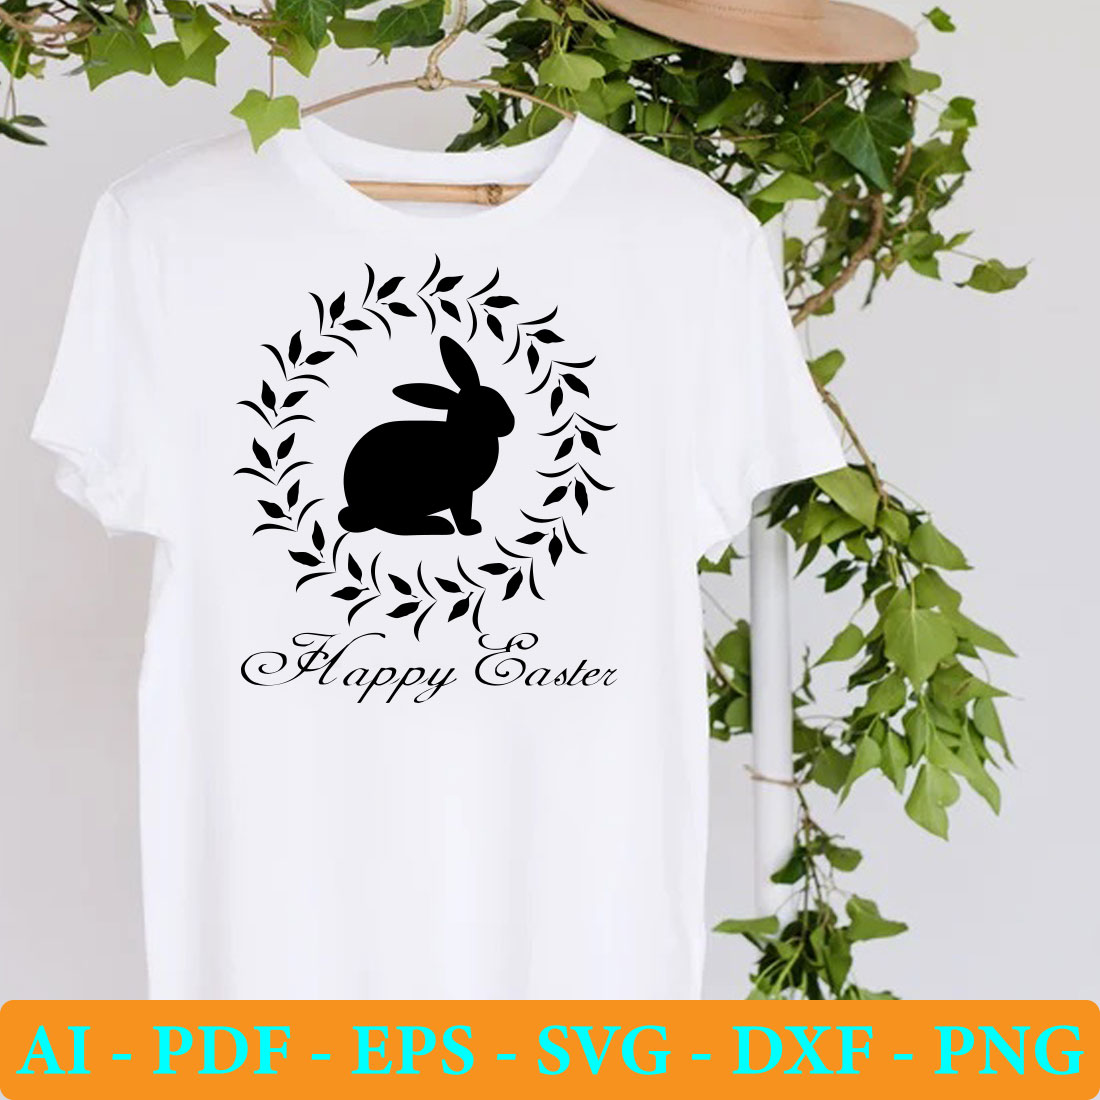 White t - shirt with a black bunny on it.